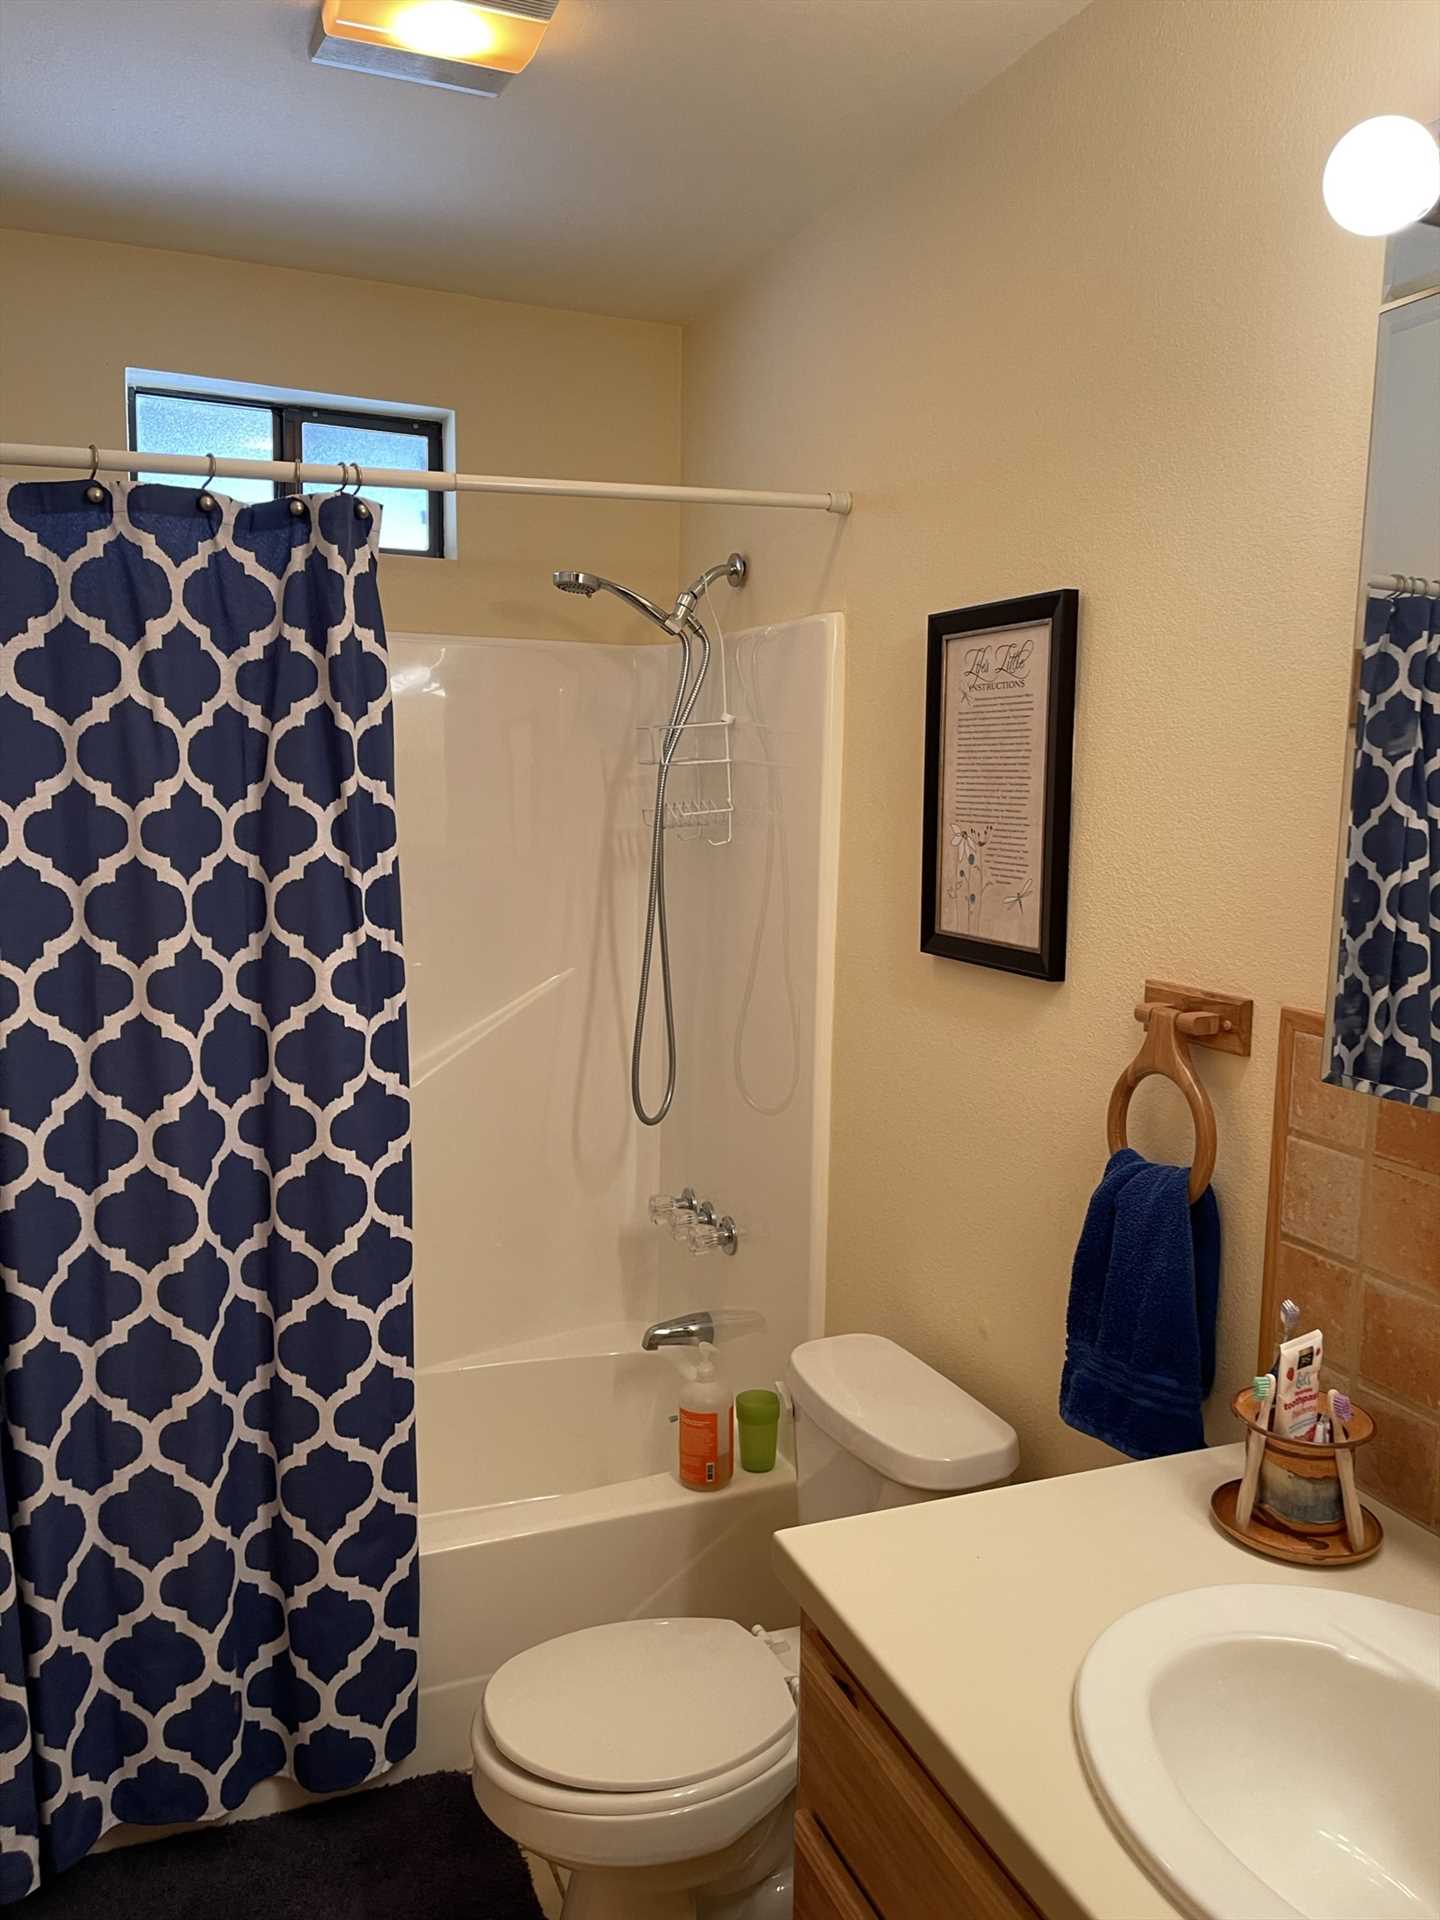                                                 The spotlessly-clean second bath includes a roomy tub and shower combo!